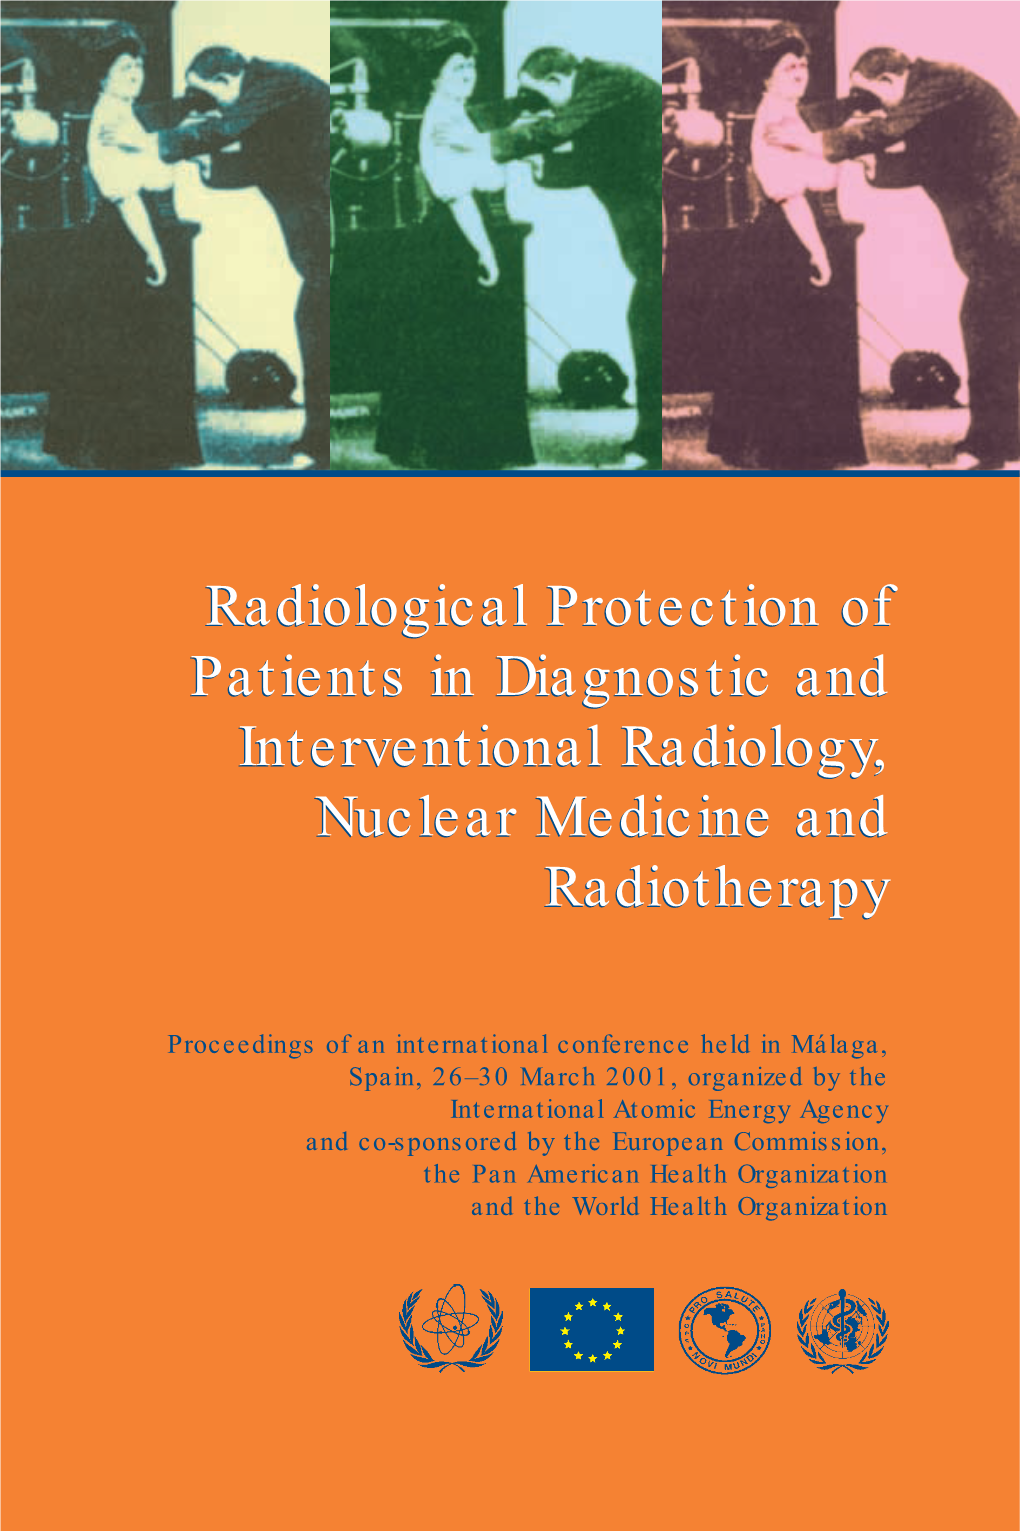 Radiological Protection of Patients in Diagnostic and Interventional Radiology, Nuclear Medicine and Radiotherapy